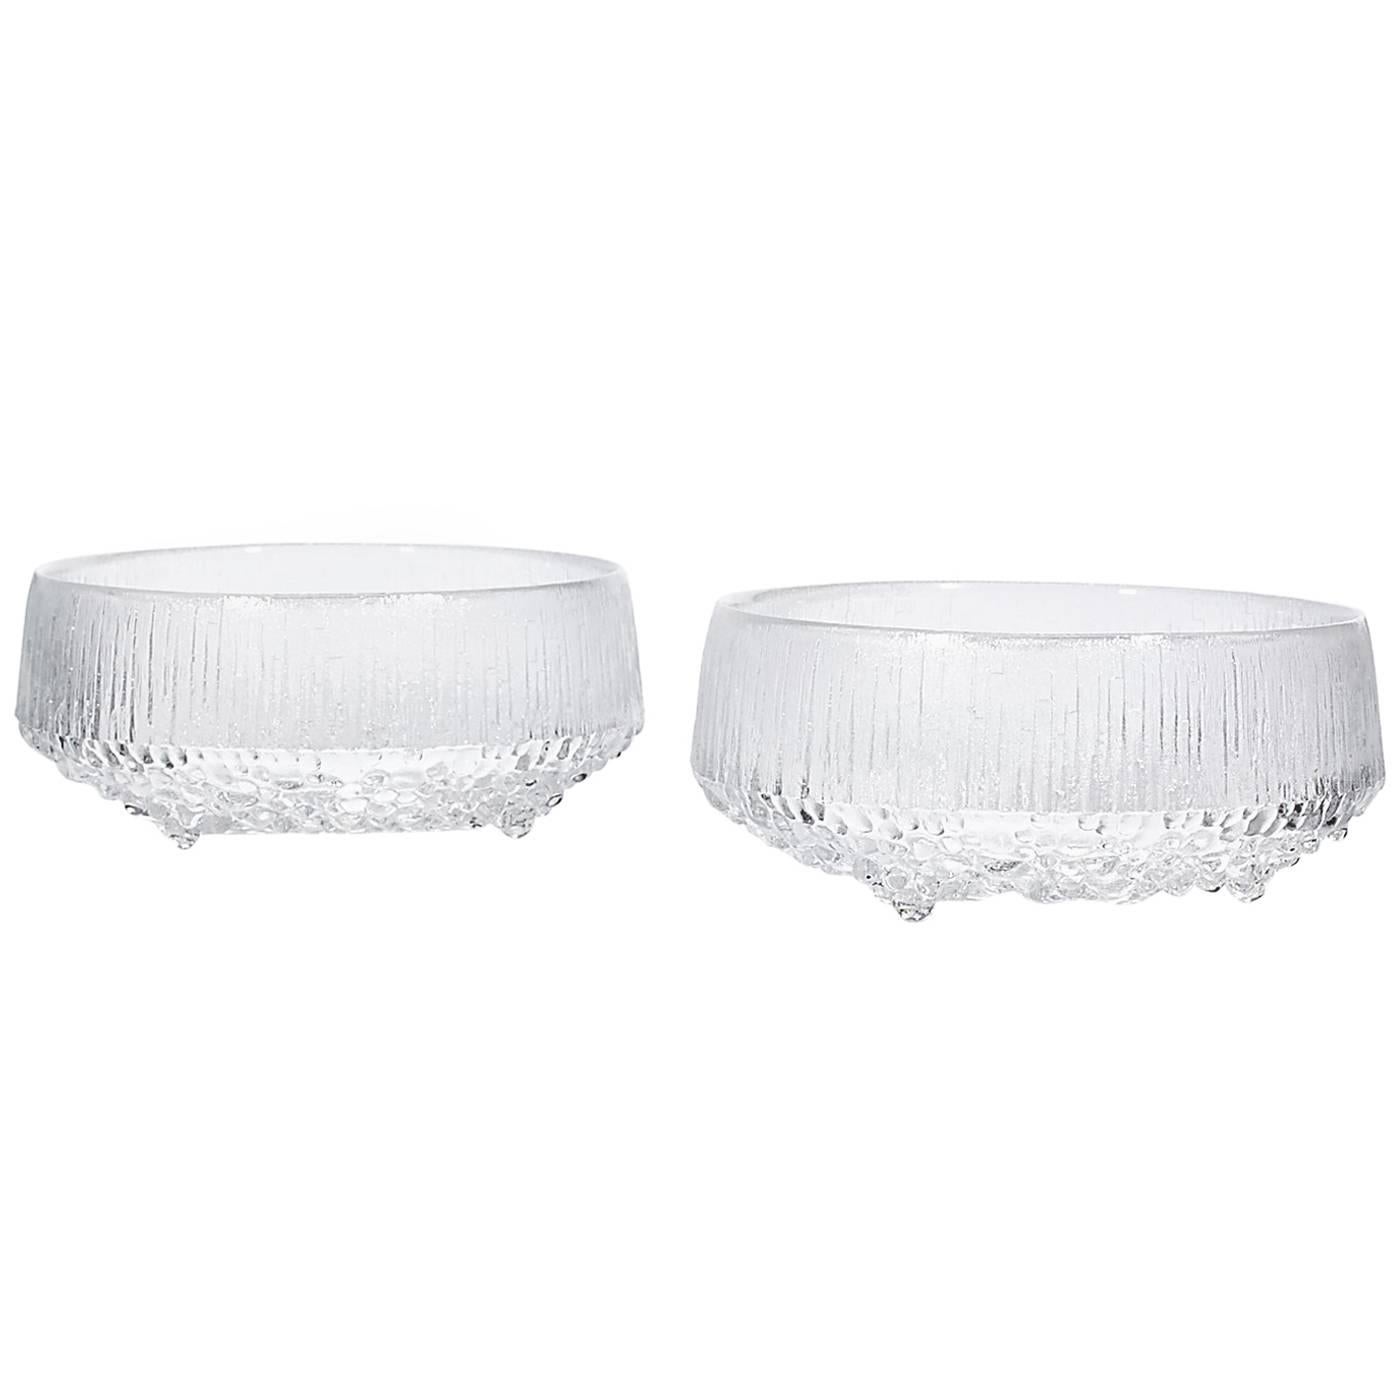 1960s Iittala Ultima Thule Bowls, Pair For Sale